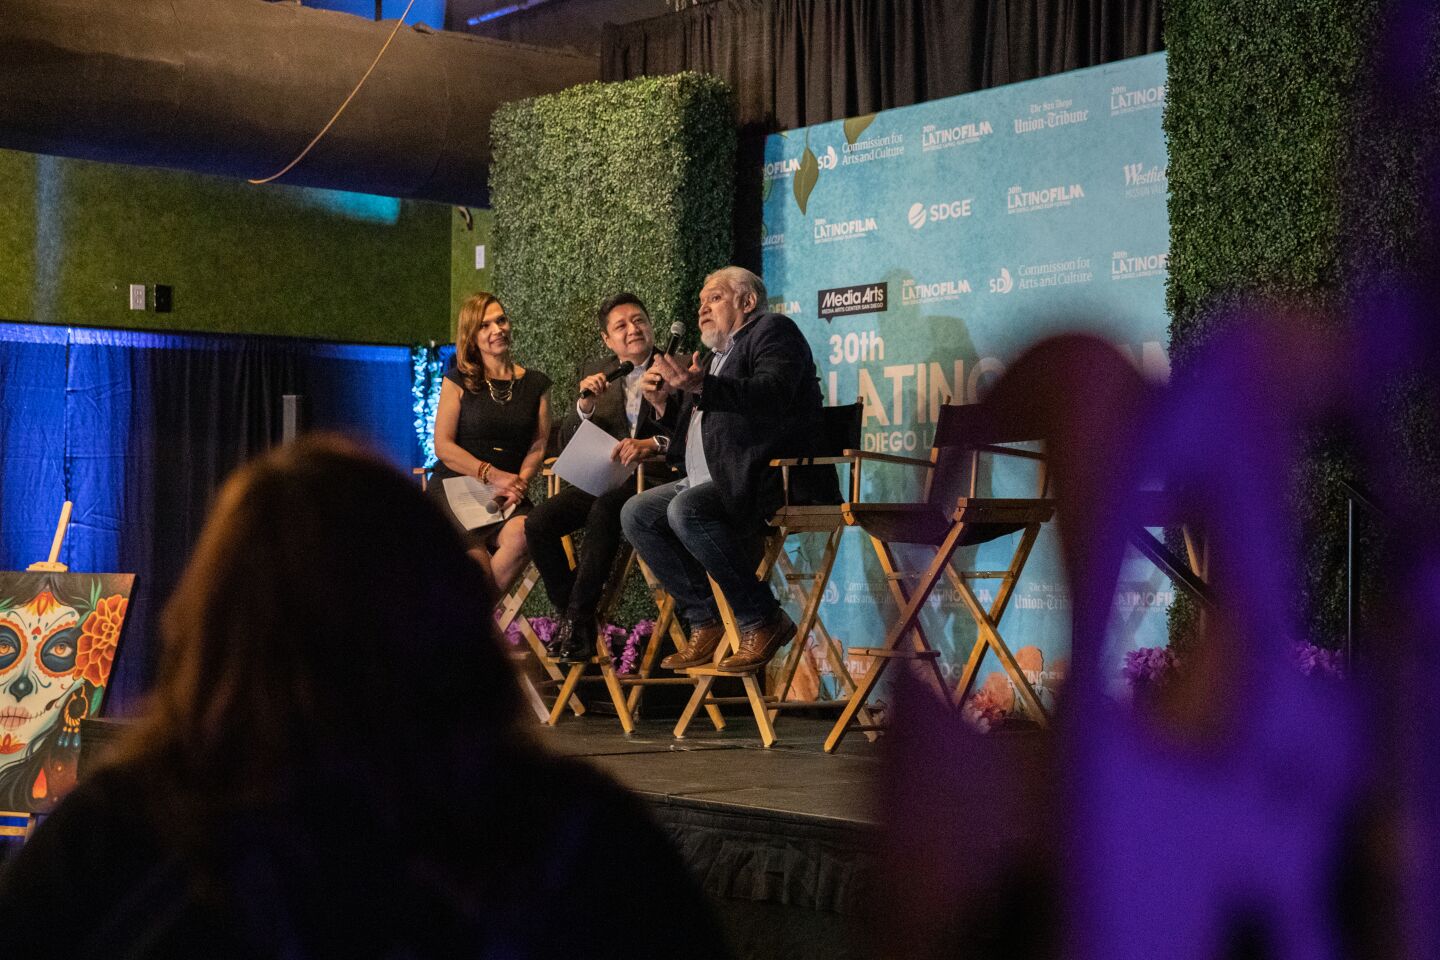 Paola Hernandez-Jiao (far left) and Luis Cruz (second to left) of The San Diego Union-Tribune host a discussion with Actor Joaquin Cosio (right) during opening night of the 30th annual San Diego Latino Film Festival at Westfield Mission Valley Mall in San Diego, CA on Thursday, March 9, 2023.